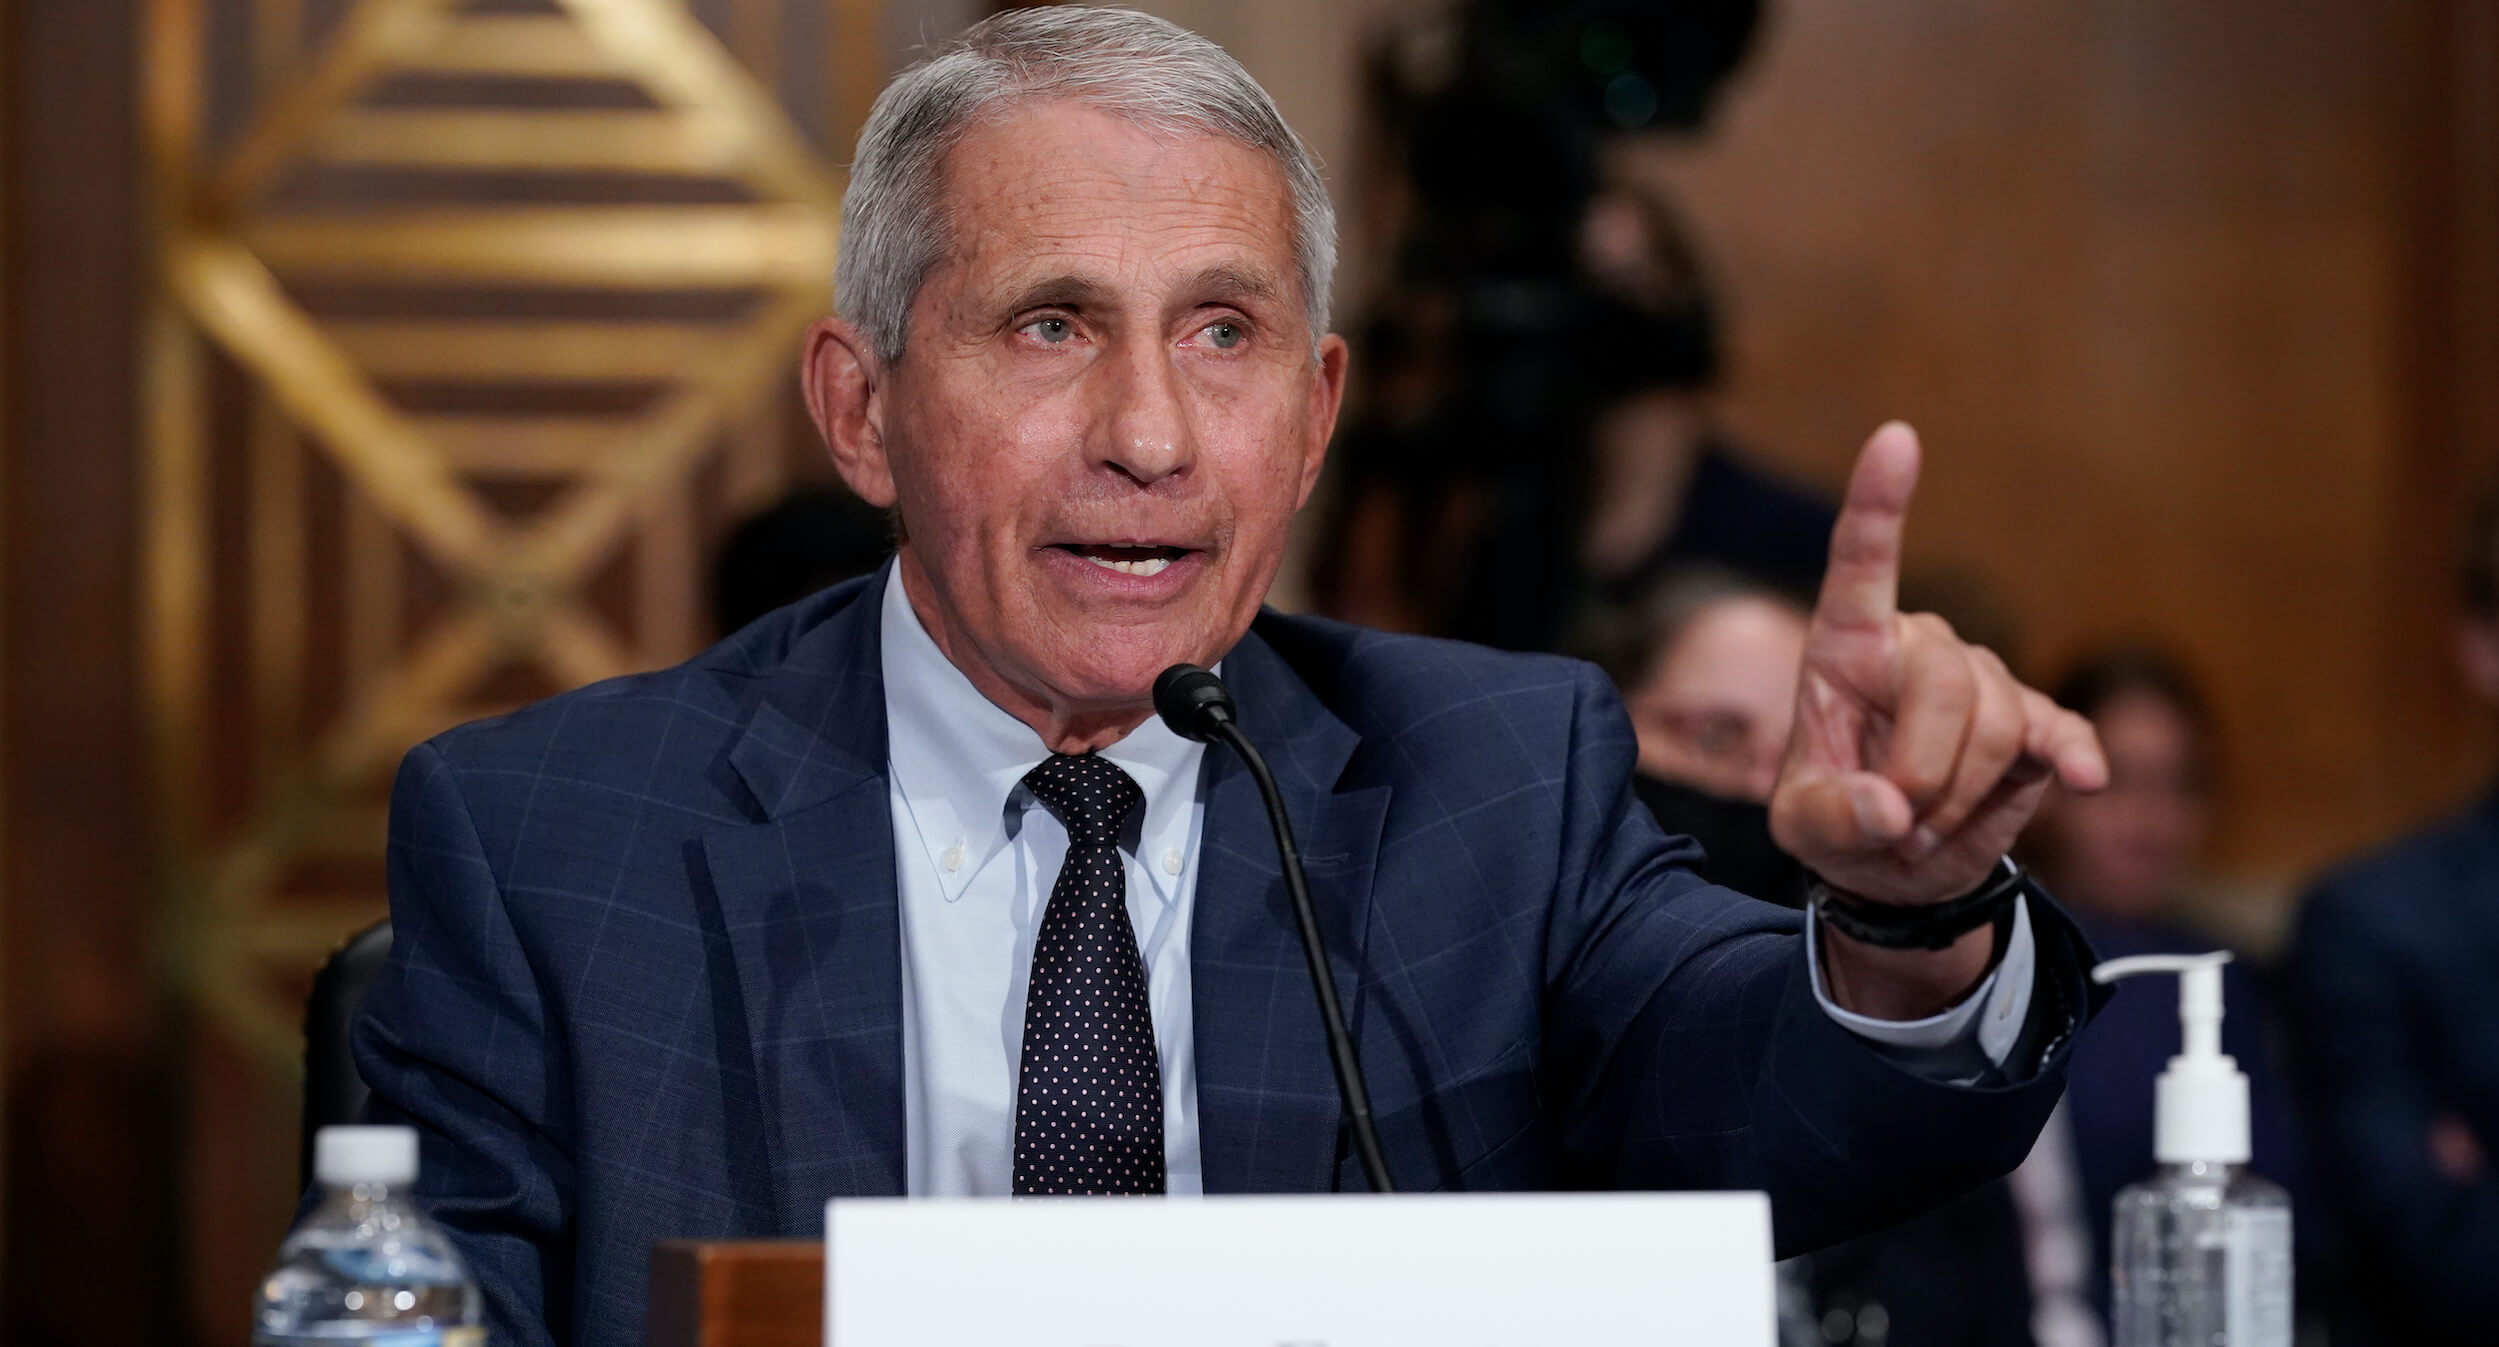 Fauci and Top Health Officials Allegedly Used $26 Billion in Taxpayer Dollars to Illegally Approve Grants